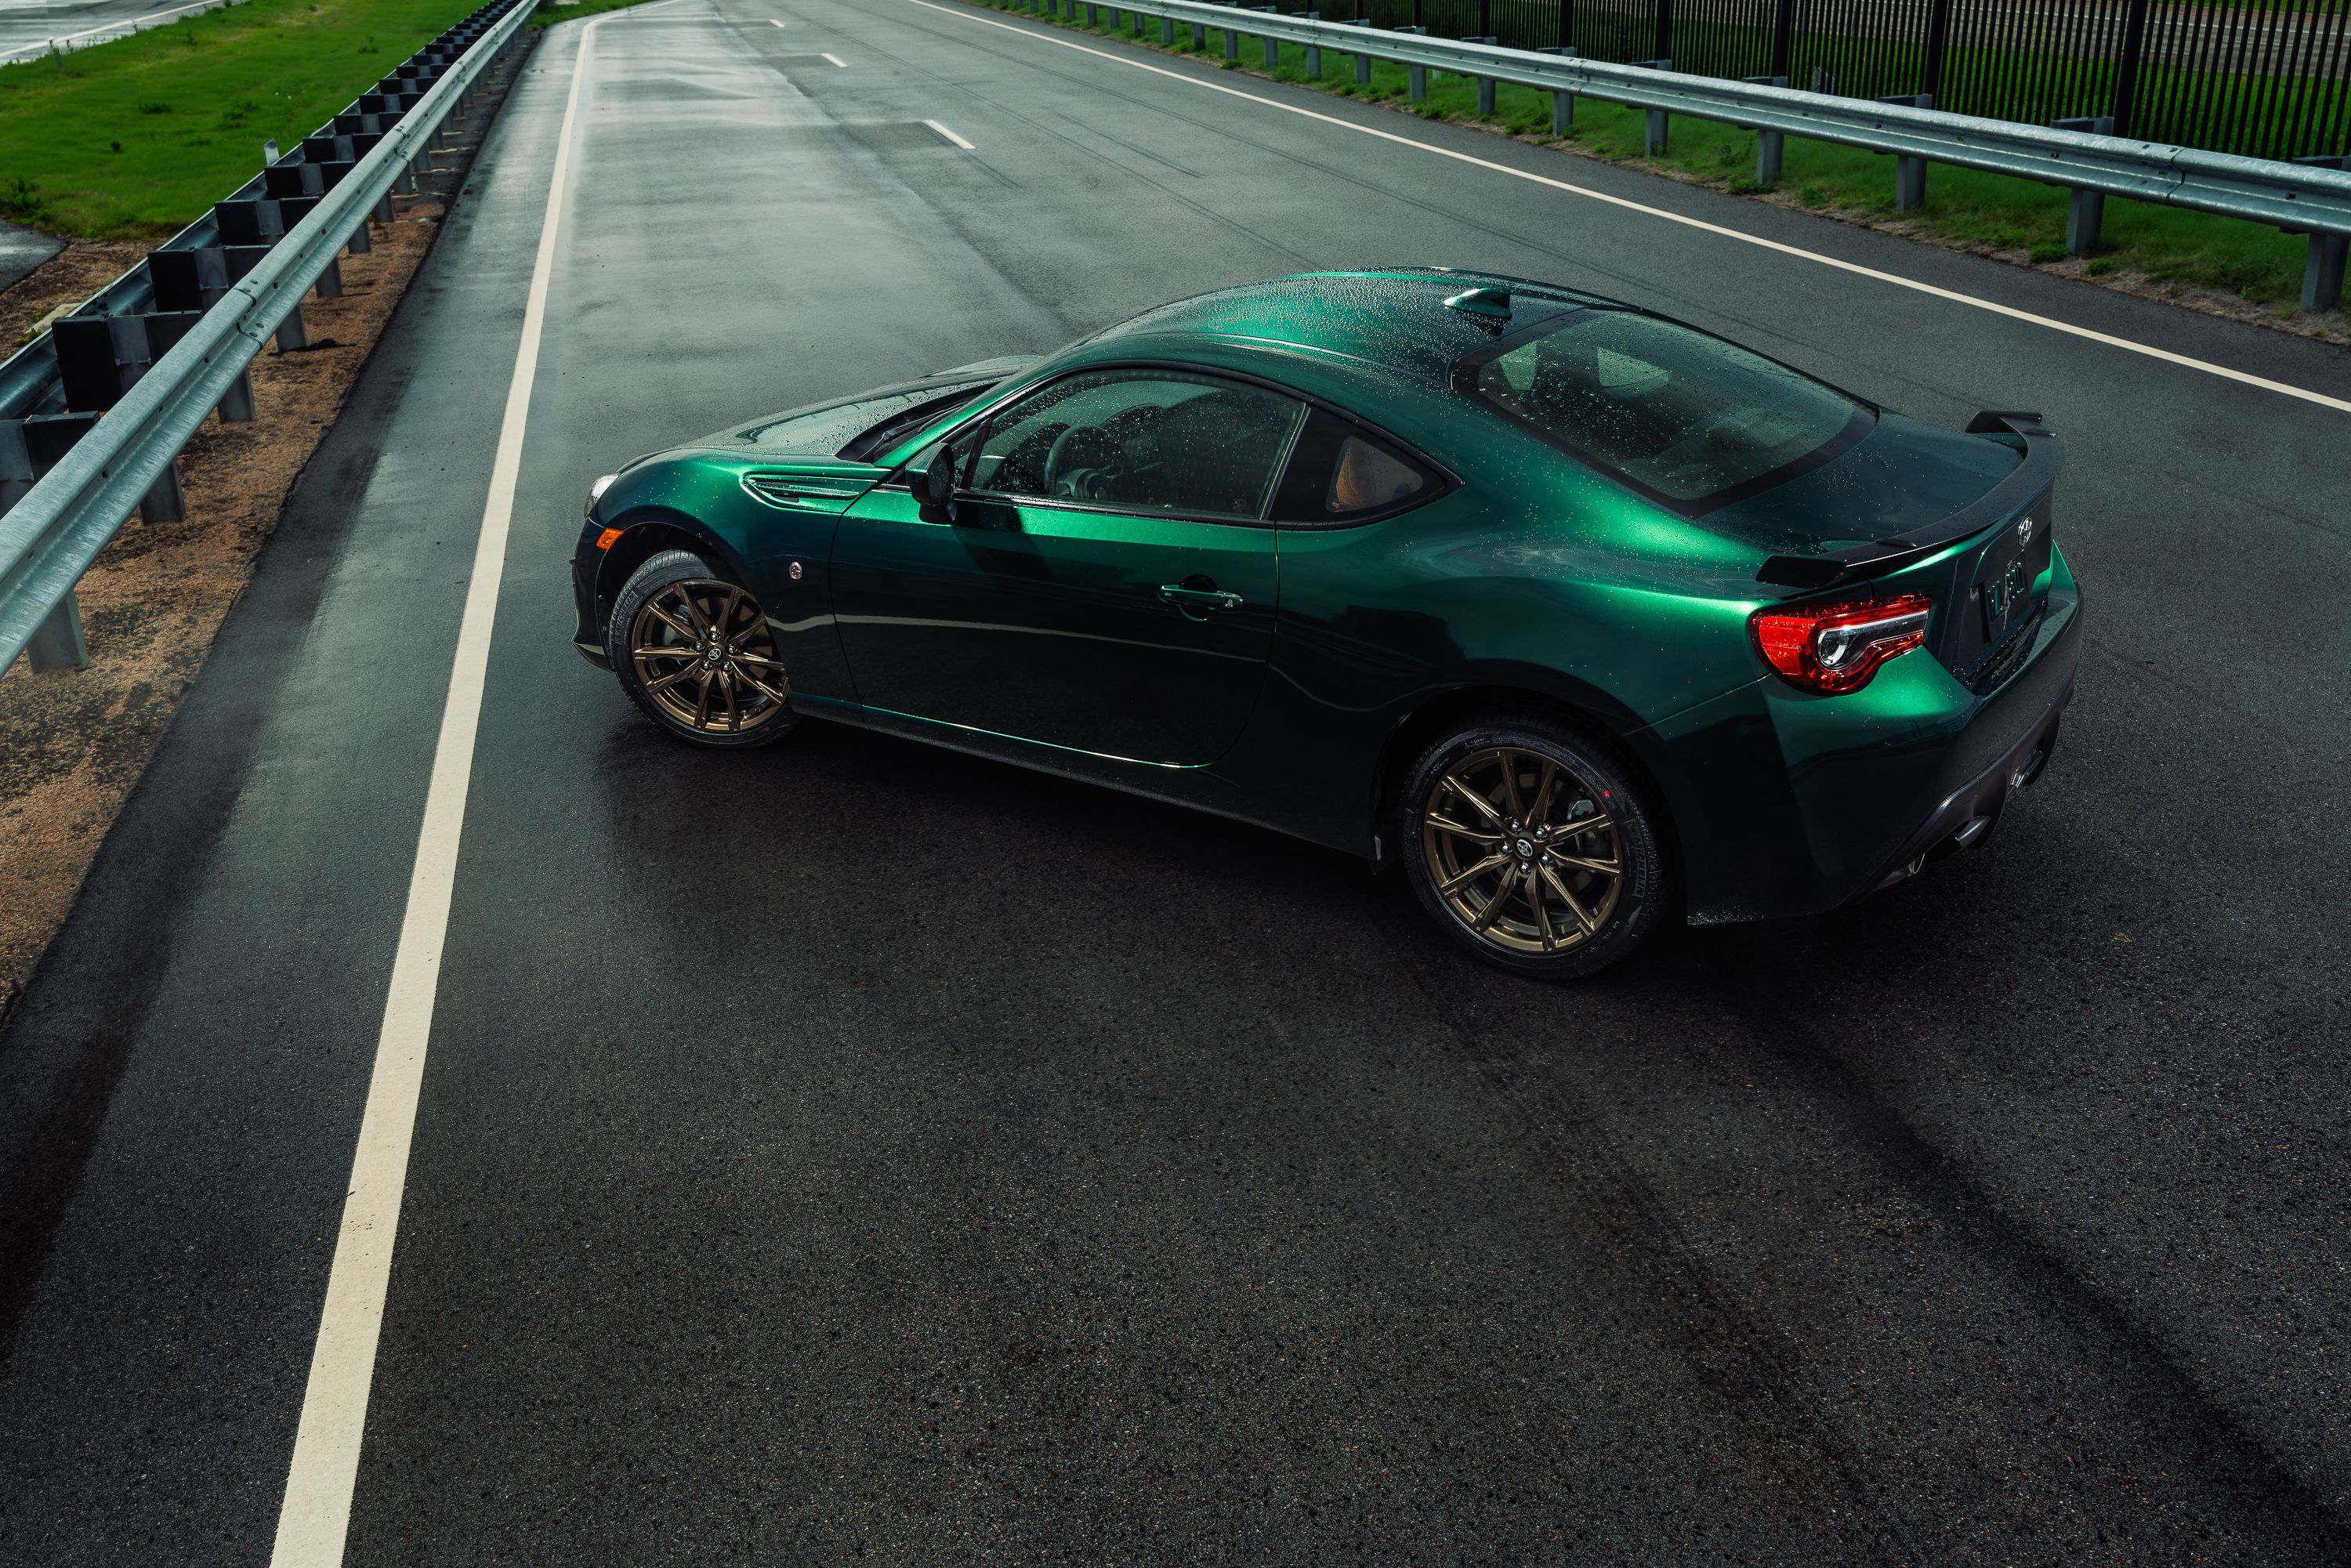 2020 Toyota 86 Hakone Edition The Sports Car In A Deep Green Color